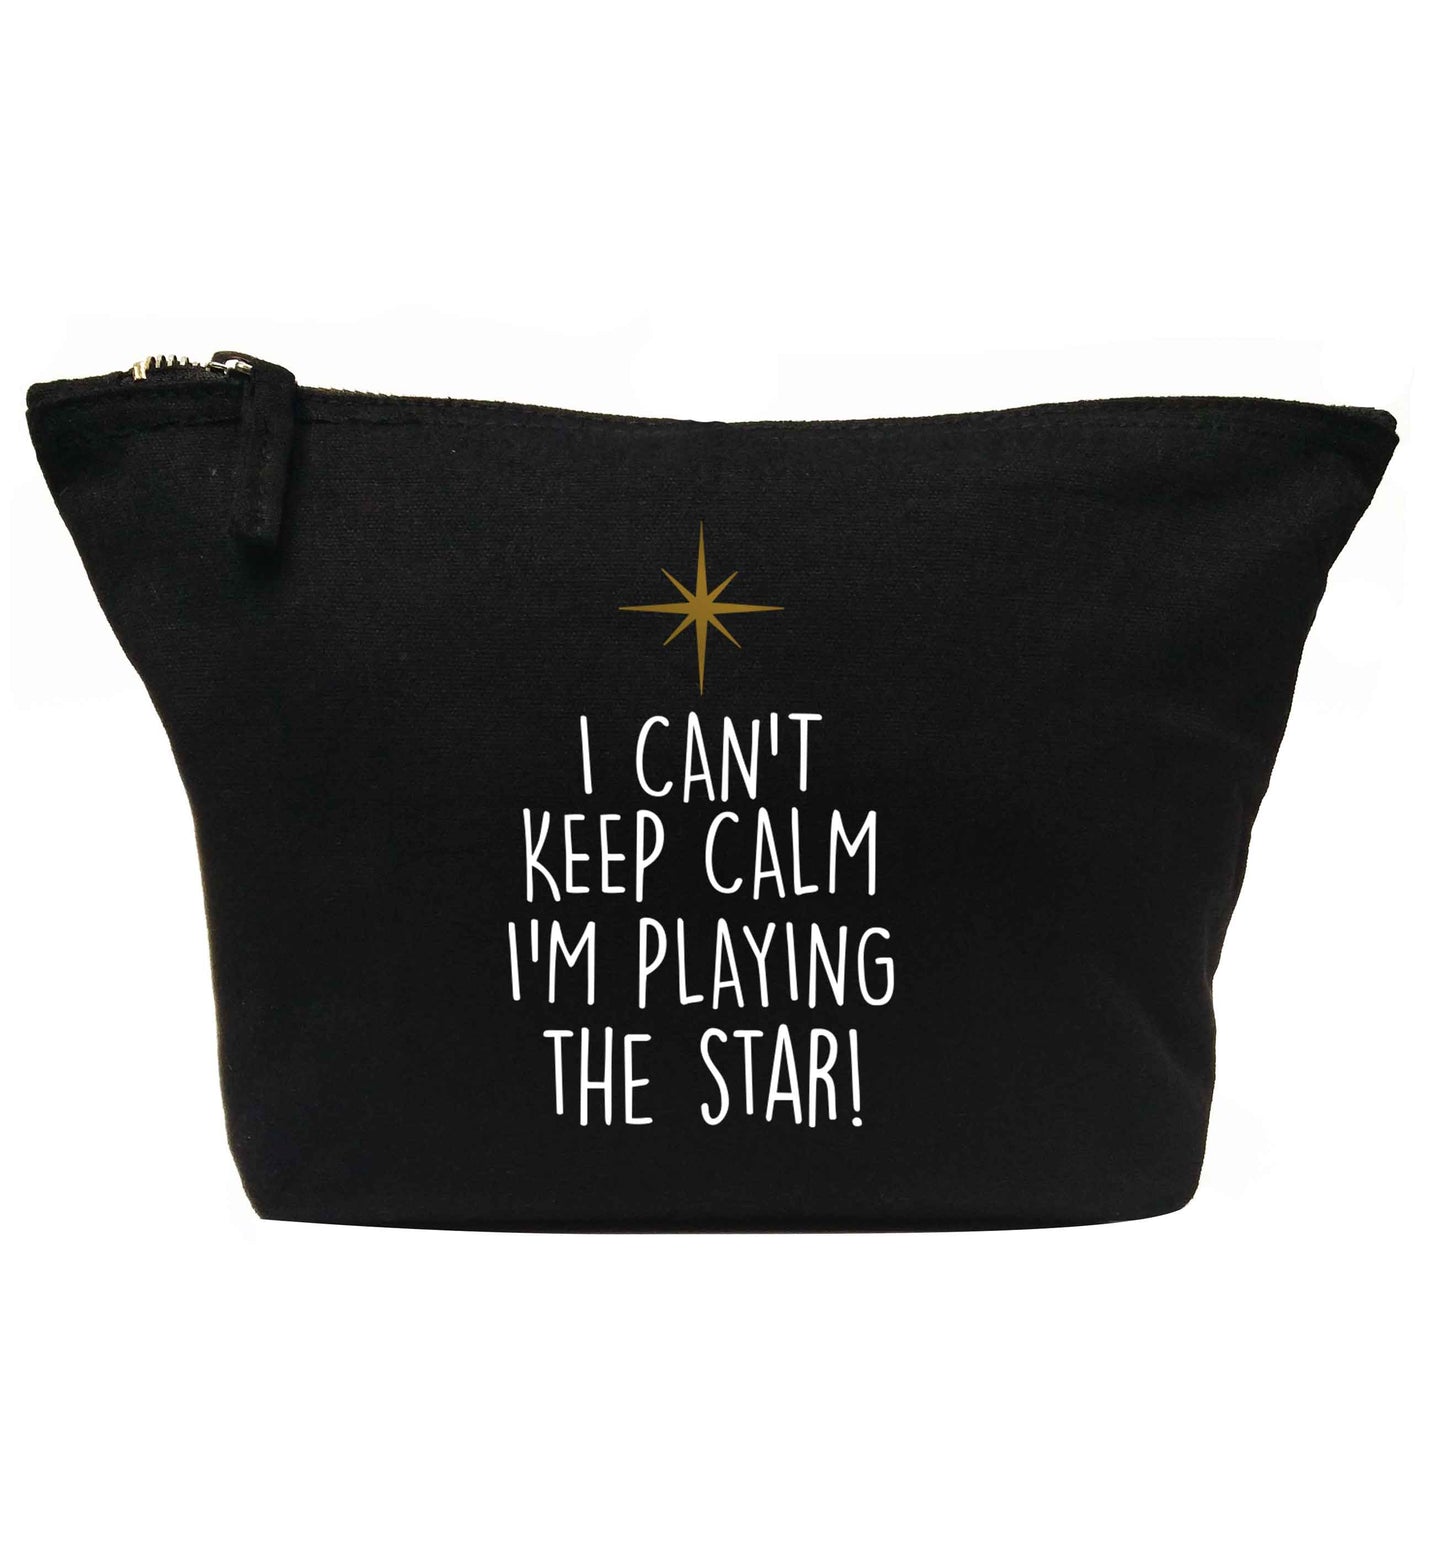 I can't keep calm I'm playing the star! | makeup / wash bag